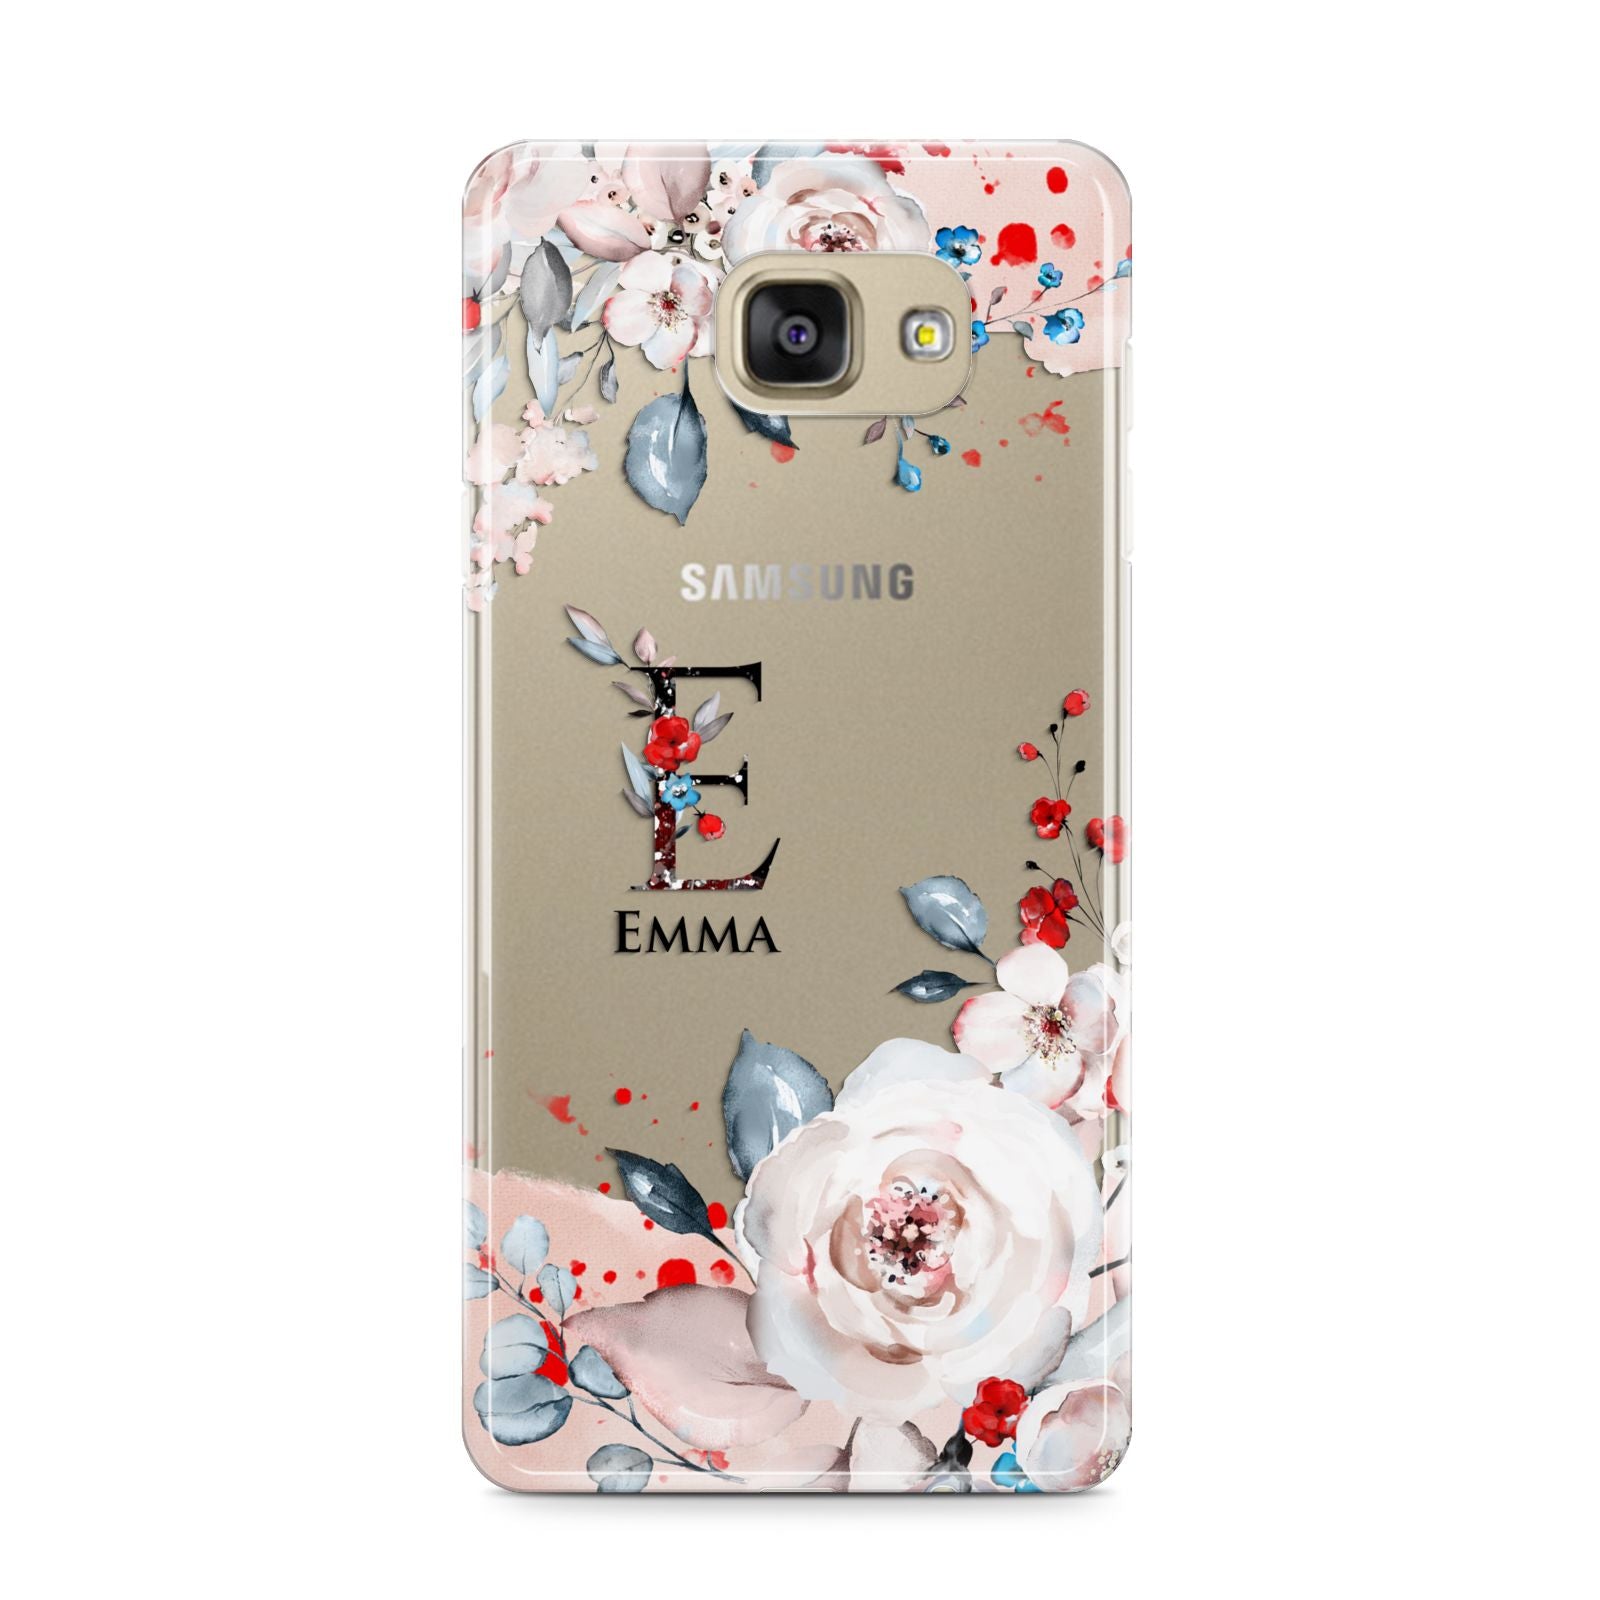 Monogrammed Roses Floral Wreath Samsung Galaxy A9 2016 Case on gold phone